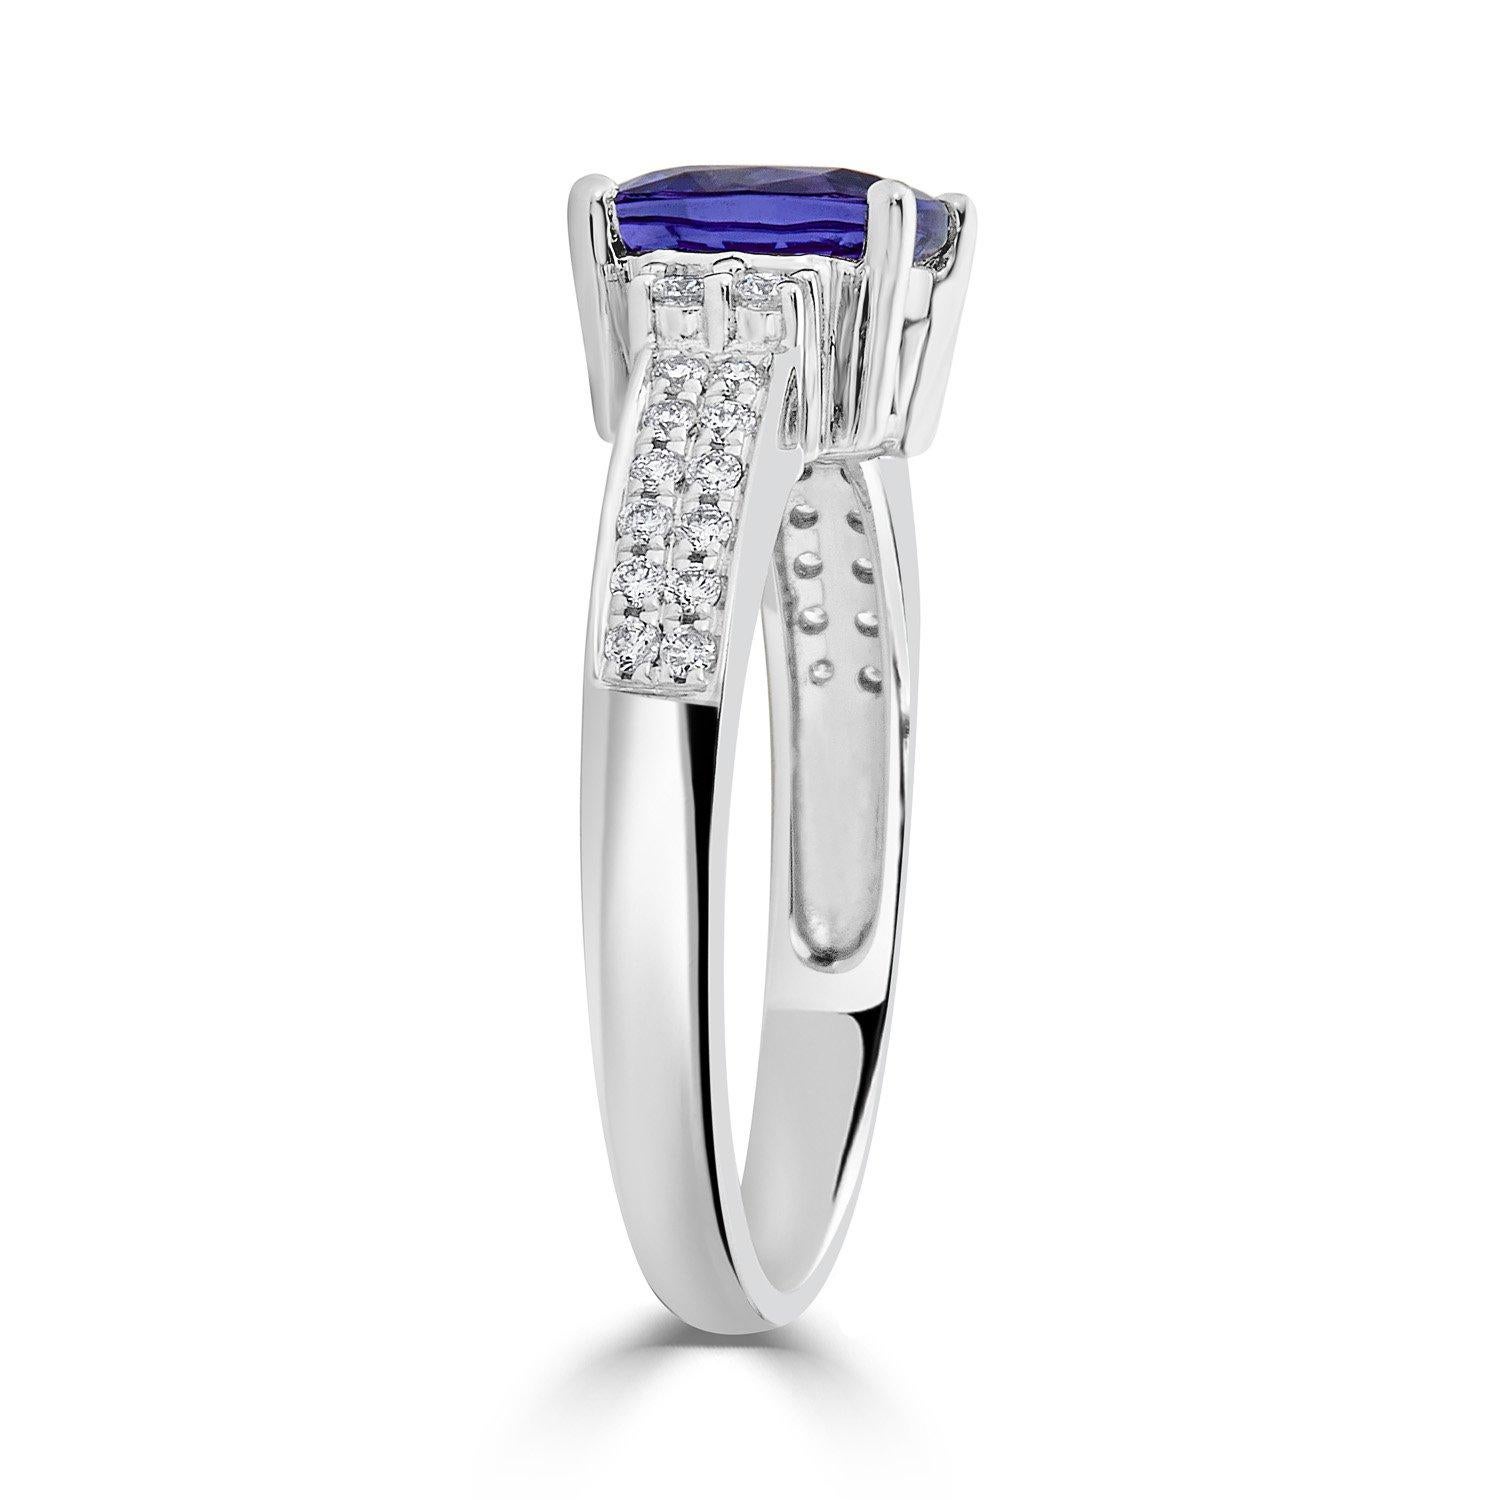 Women's 1.68Ct Tanzanite Ring with 0.19Tct Diamonds Set in 14K White Gold For Sale